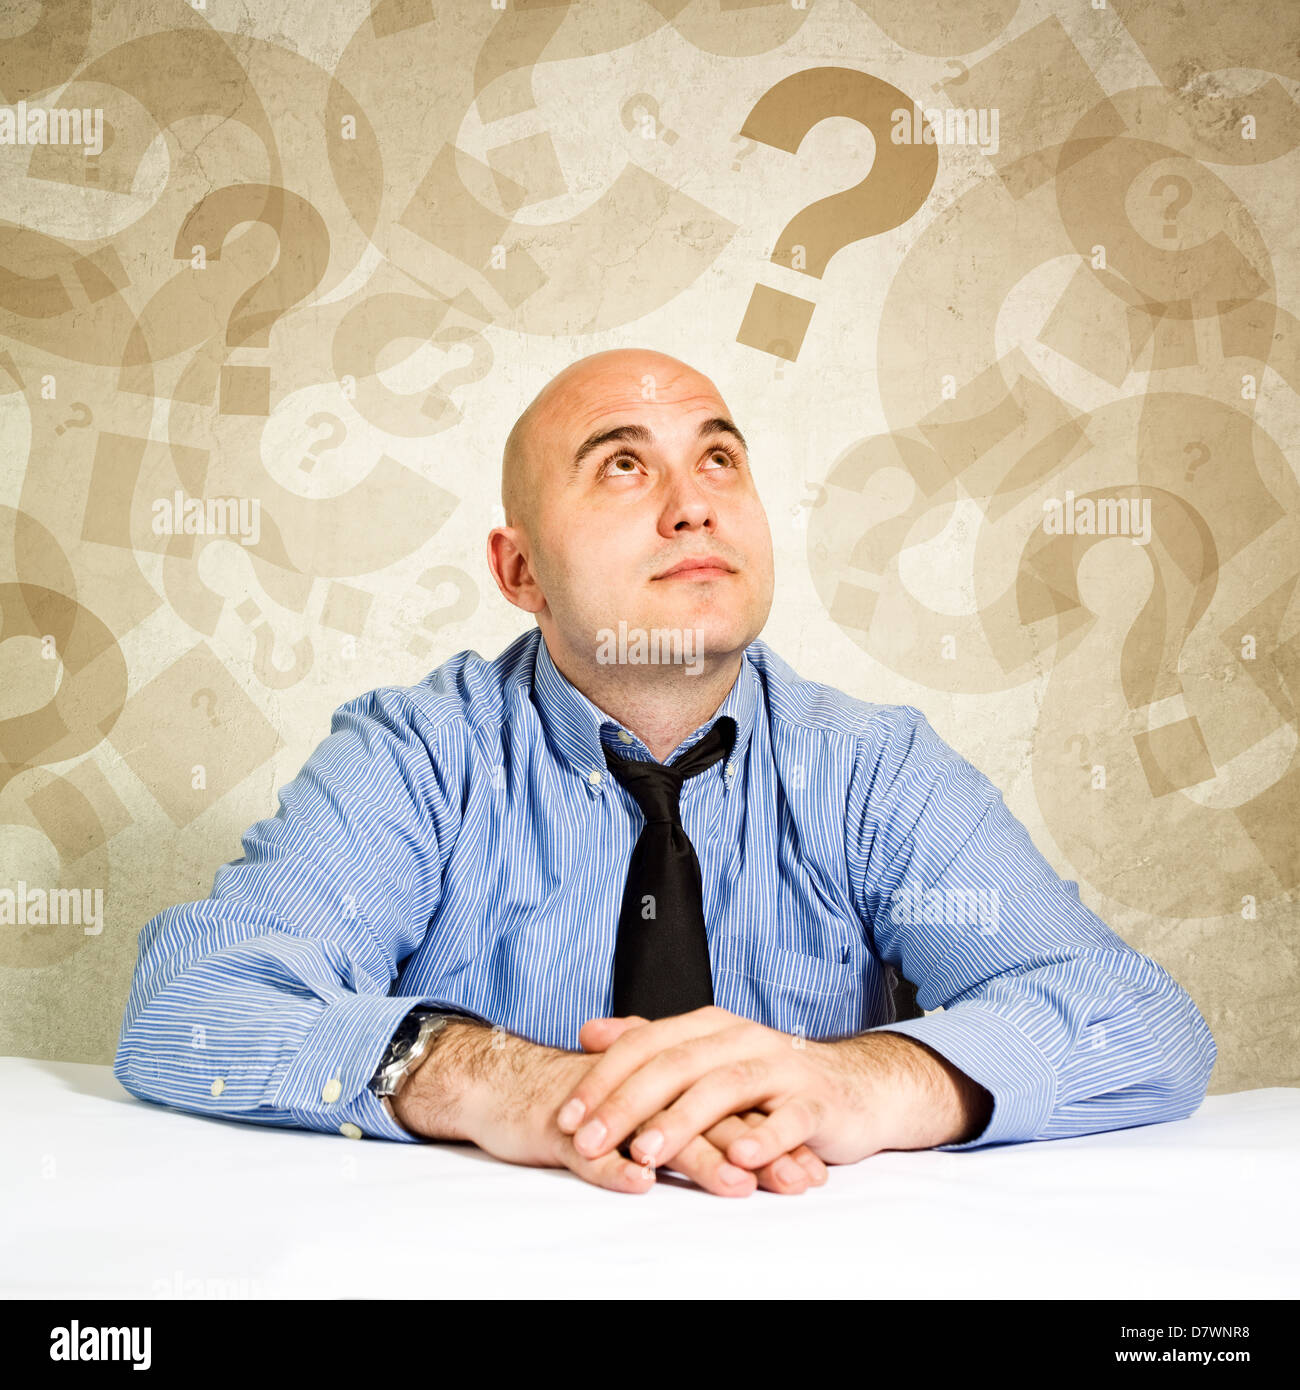 Businessman thinking and questioning, looking at question marks around his head. Stock Photo